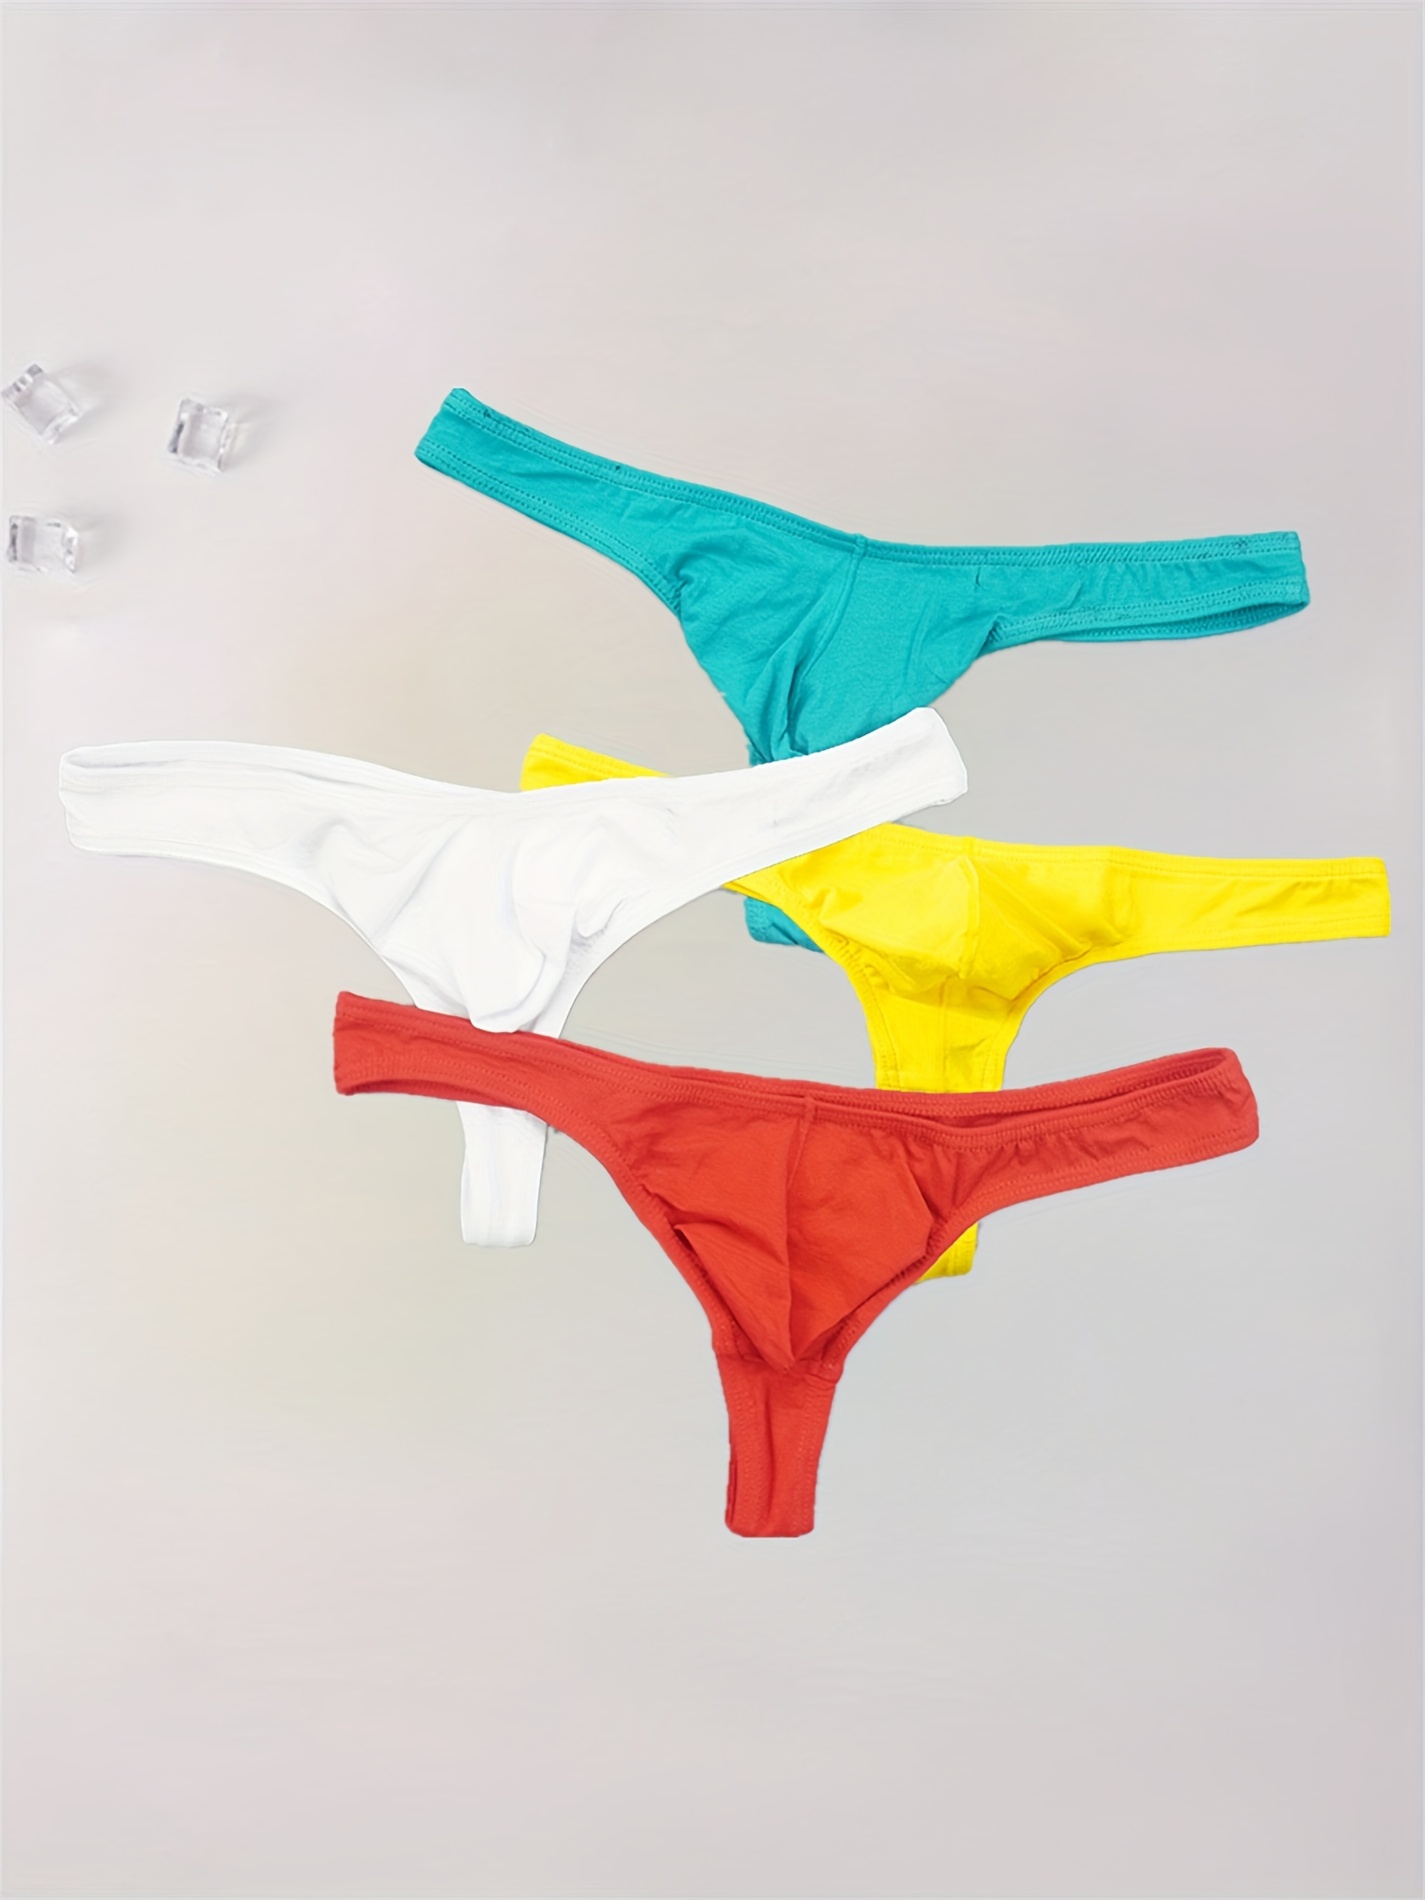 4 Pack Women Sexy Lingerie Cotton Thongs G-string T-back Panties